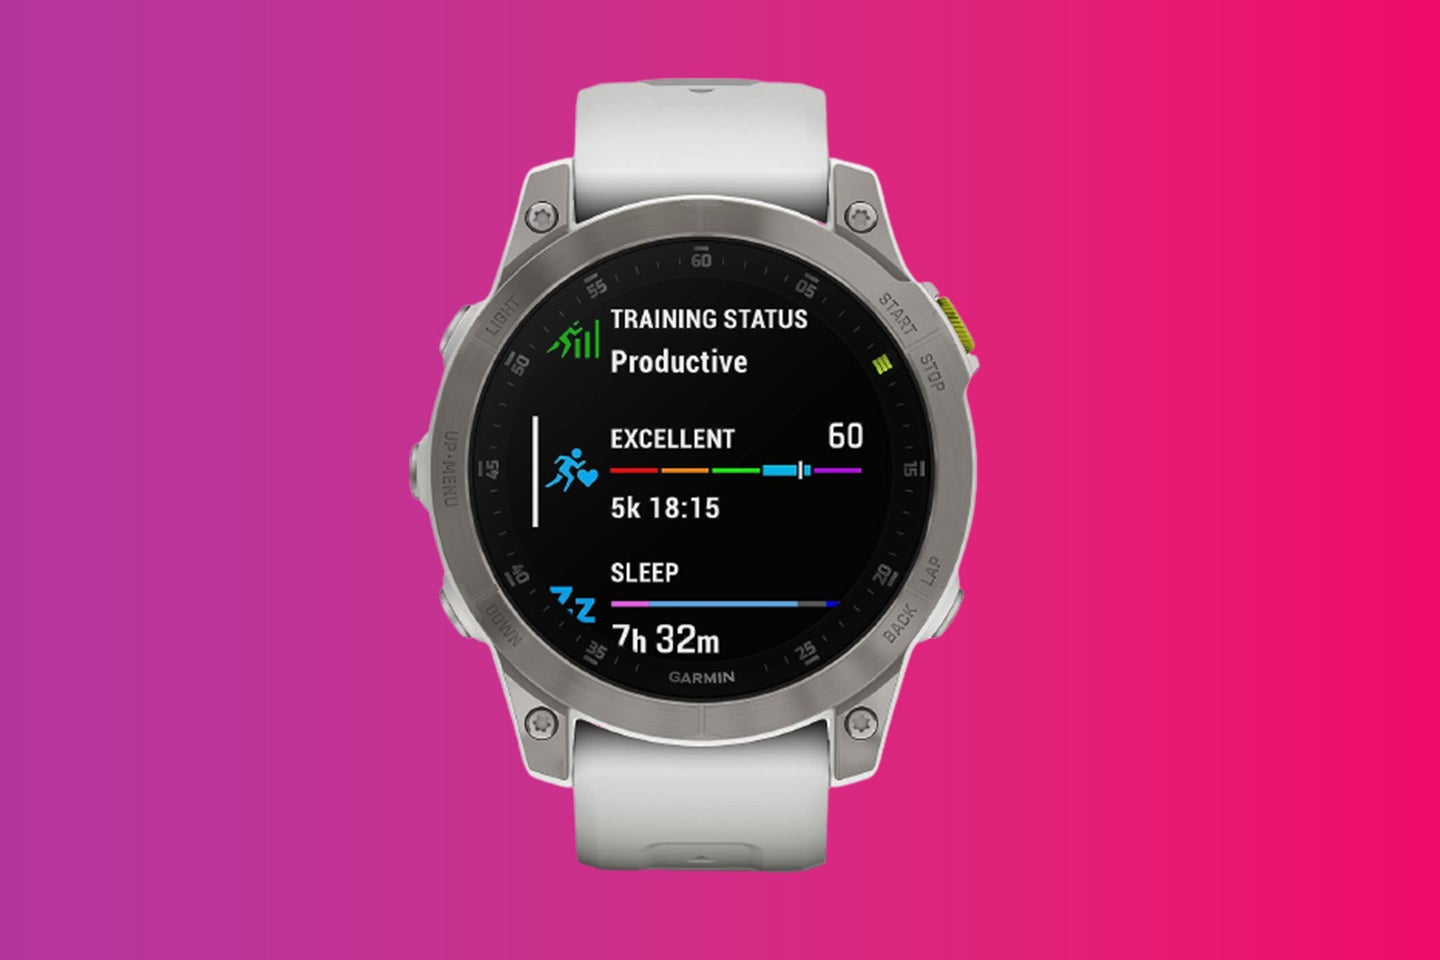 A Garmin watch on a pink and red background